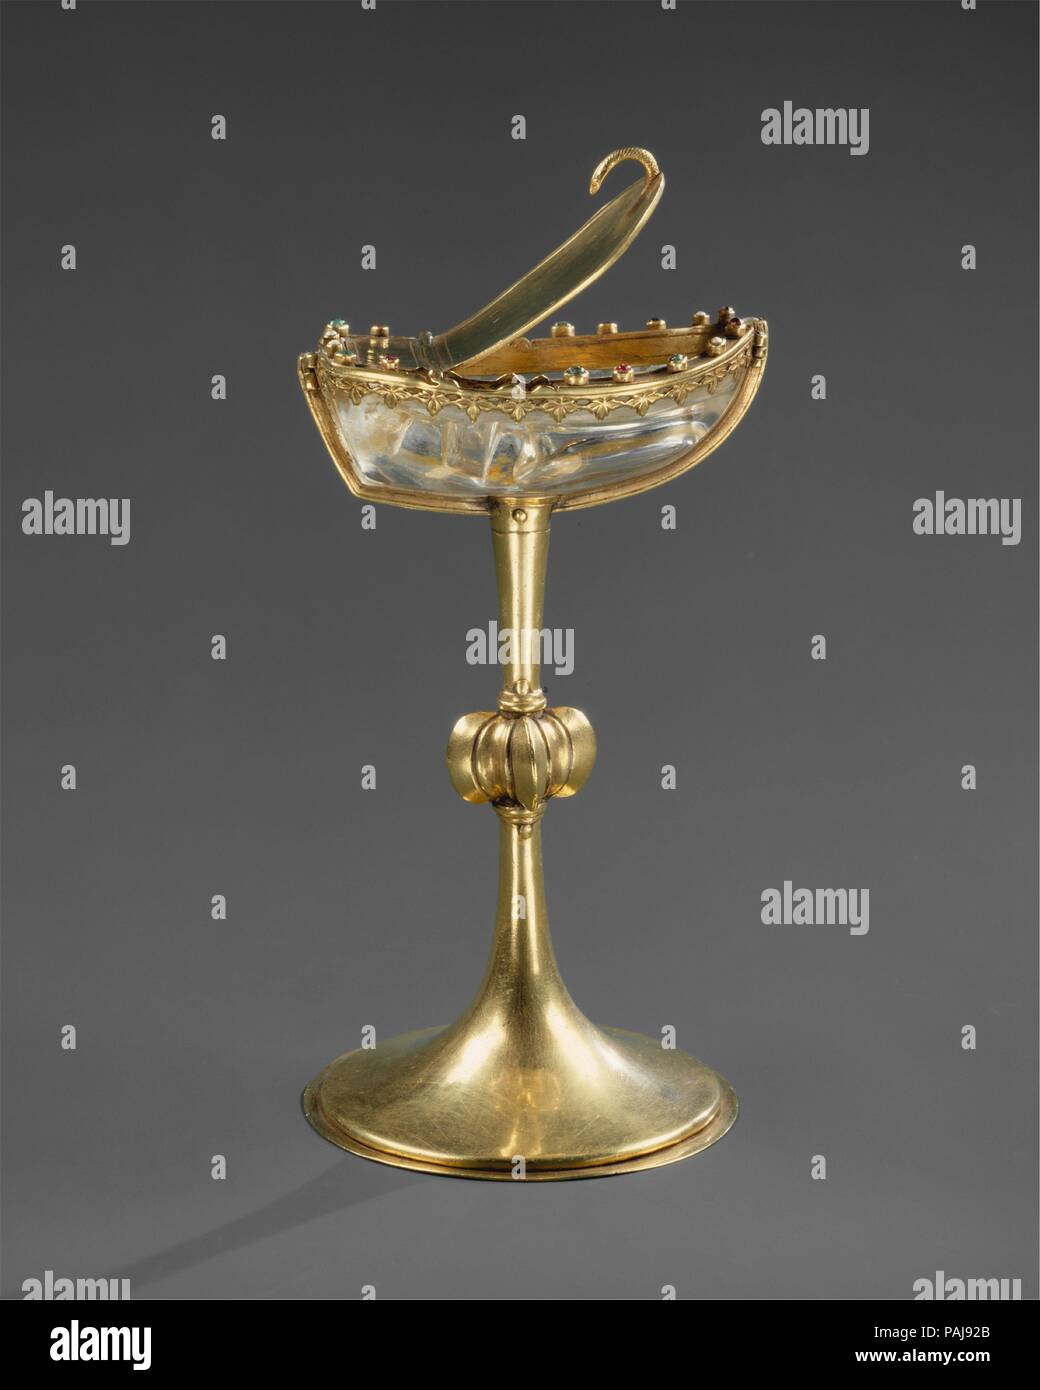 Saltcellar. Culture: French. Dimensions: H. 5 1/2 in. (14 cm); Diam. of  foot: 3 1/8 in. (7.9 cm). Date: mid-13th century.  Refined design, exquisite craftsmanship, and costly materials make this a rare and unusually precious object. The rock crystal, cut in the shape of a boat, may have served as a container for salt. Such table objects are described in several French royal inventories. The attribution is supported by the similarity of design to other mid-thirteenth century objects ascribed to Paris, a preeminent center of goldsmithing and carved crystal work. Museum: Metropolitan Museum of A Stock Photo